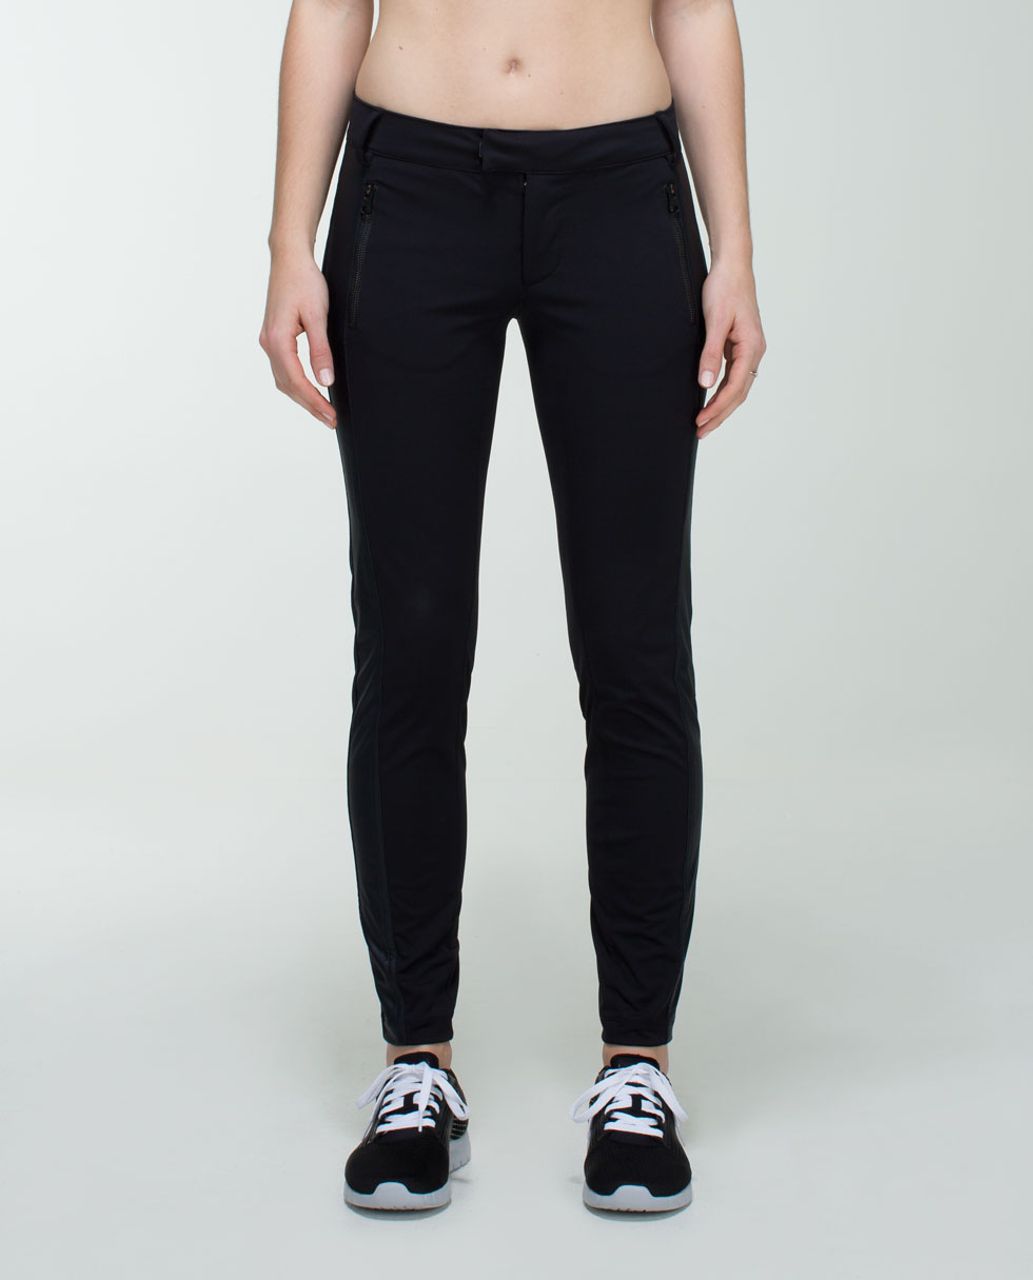 Lululemon Here To There Pant - Black